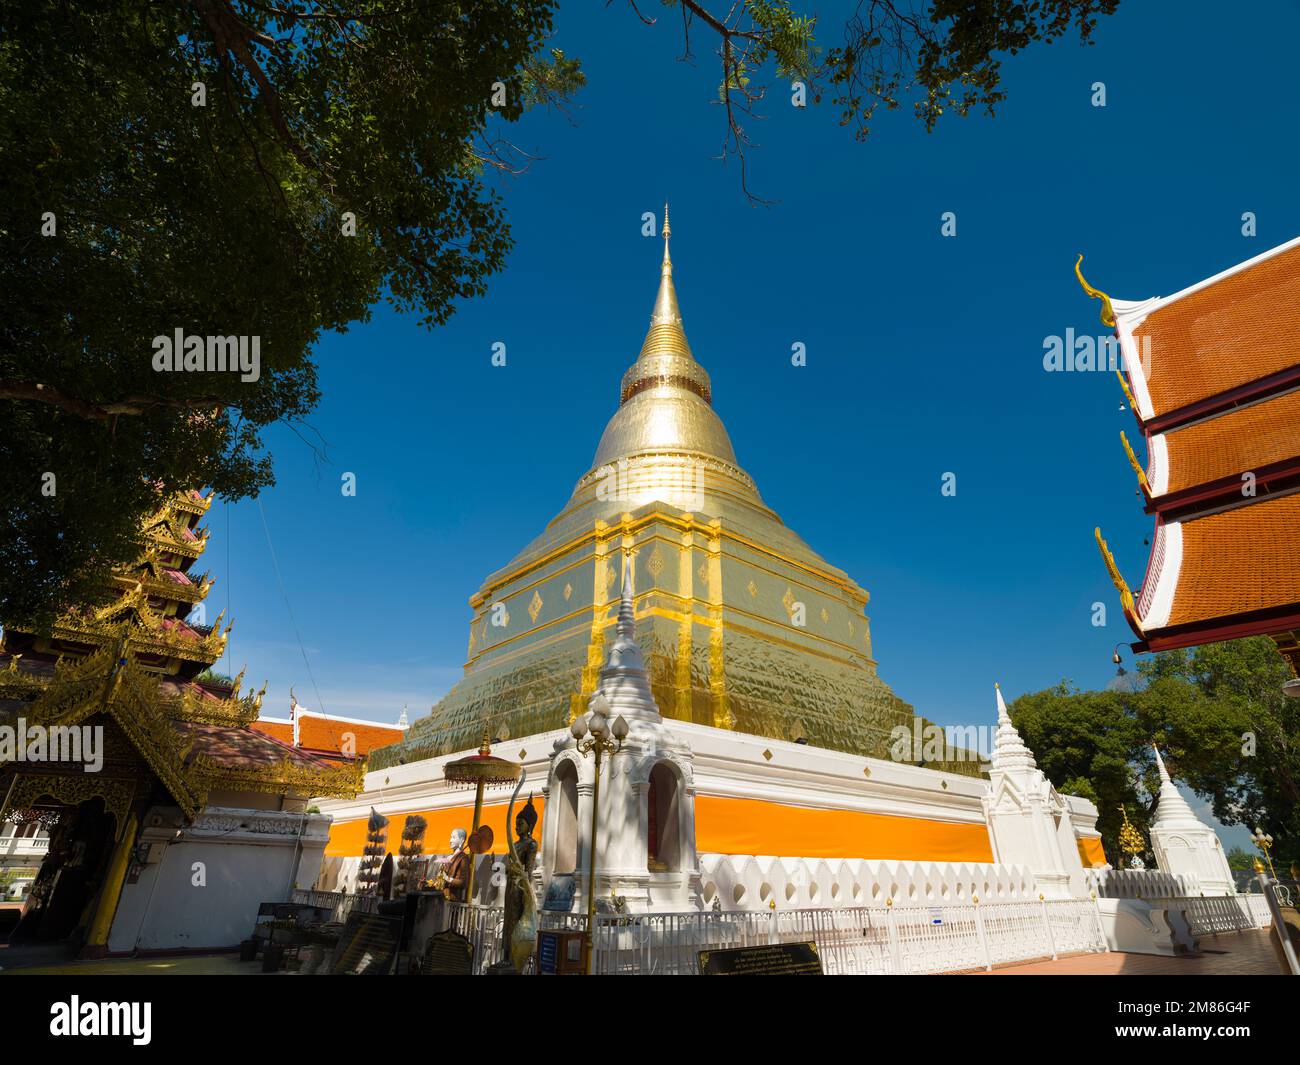 Lampang, Thailand. November 21, 2022. Wat Kaew Don Tao Suchadaram Temple. It is the primary Buddhist temple in Lampang city. Stock Photo